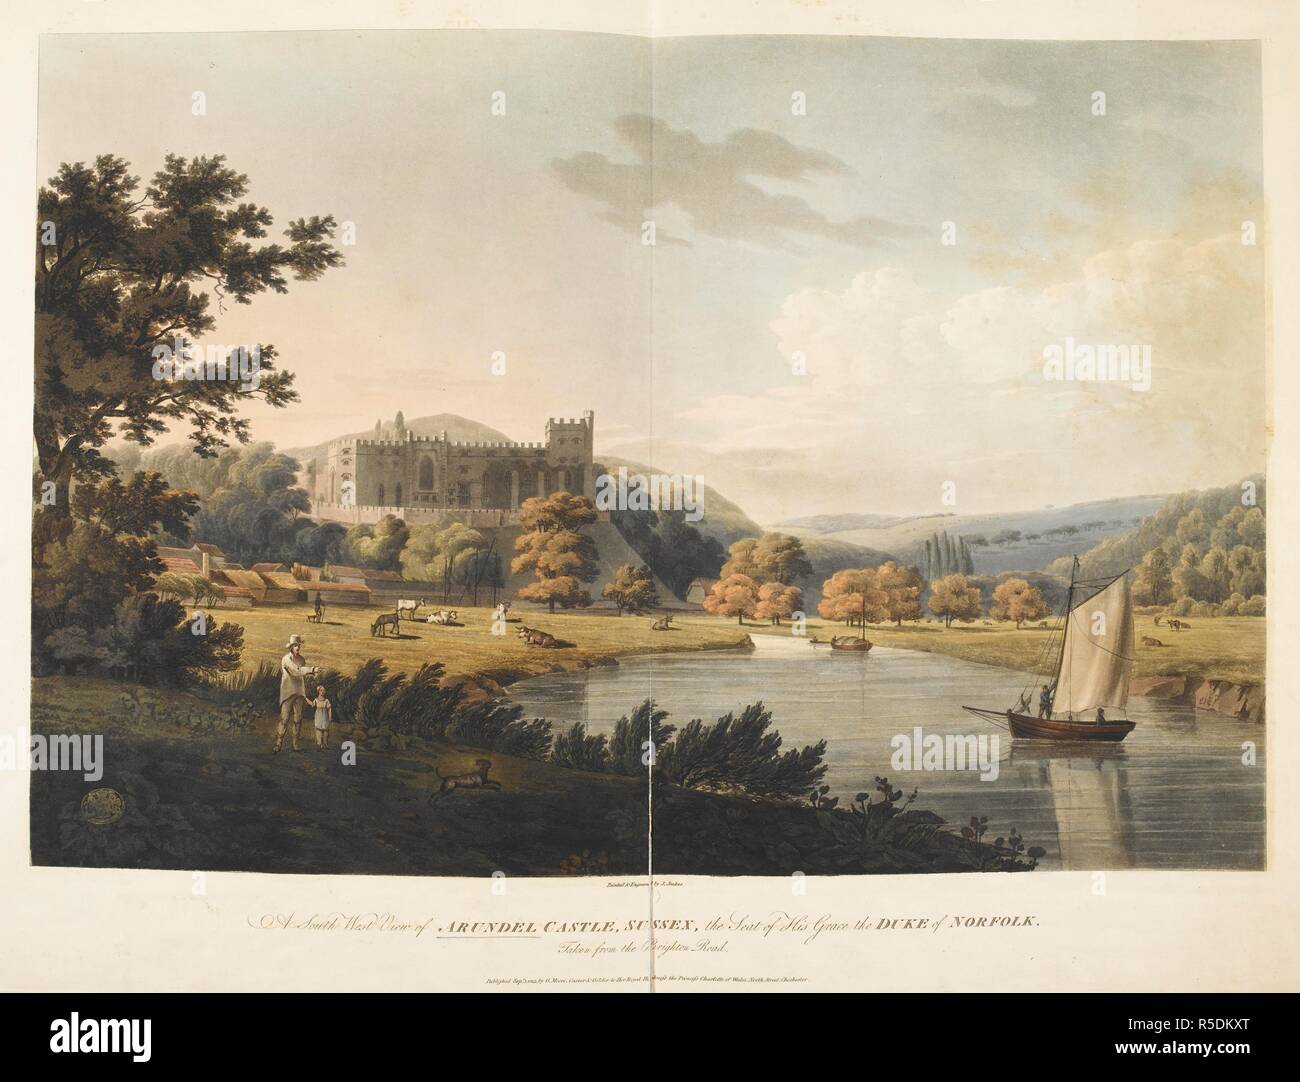 A sailing boat on the water; figures and a dog in the foreground; cattle grazing in the middle ground; Arundel Castle in the distance; trees throughout the scene. A South West View of ARUNDEL CASTLE, SUSSEX, the Seat of His Grace the DUKE of NORFOLK Taken from the Brighton Road. [Chichester] : Published Sepr 1 1815 by G. Moore, Carver & Gilder to Her Royal Highness the Princess Charlotte of Wales, North Street, Chichester., [September 1 1815]. Aquatint and etching with hand-colouring. Source: Maps K.Top.42.12.d. Language: English. Author: Jeakes, J. Stock Photo